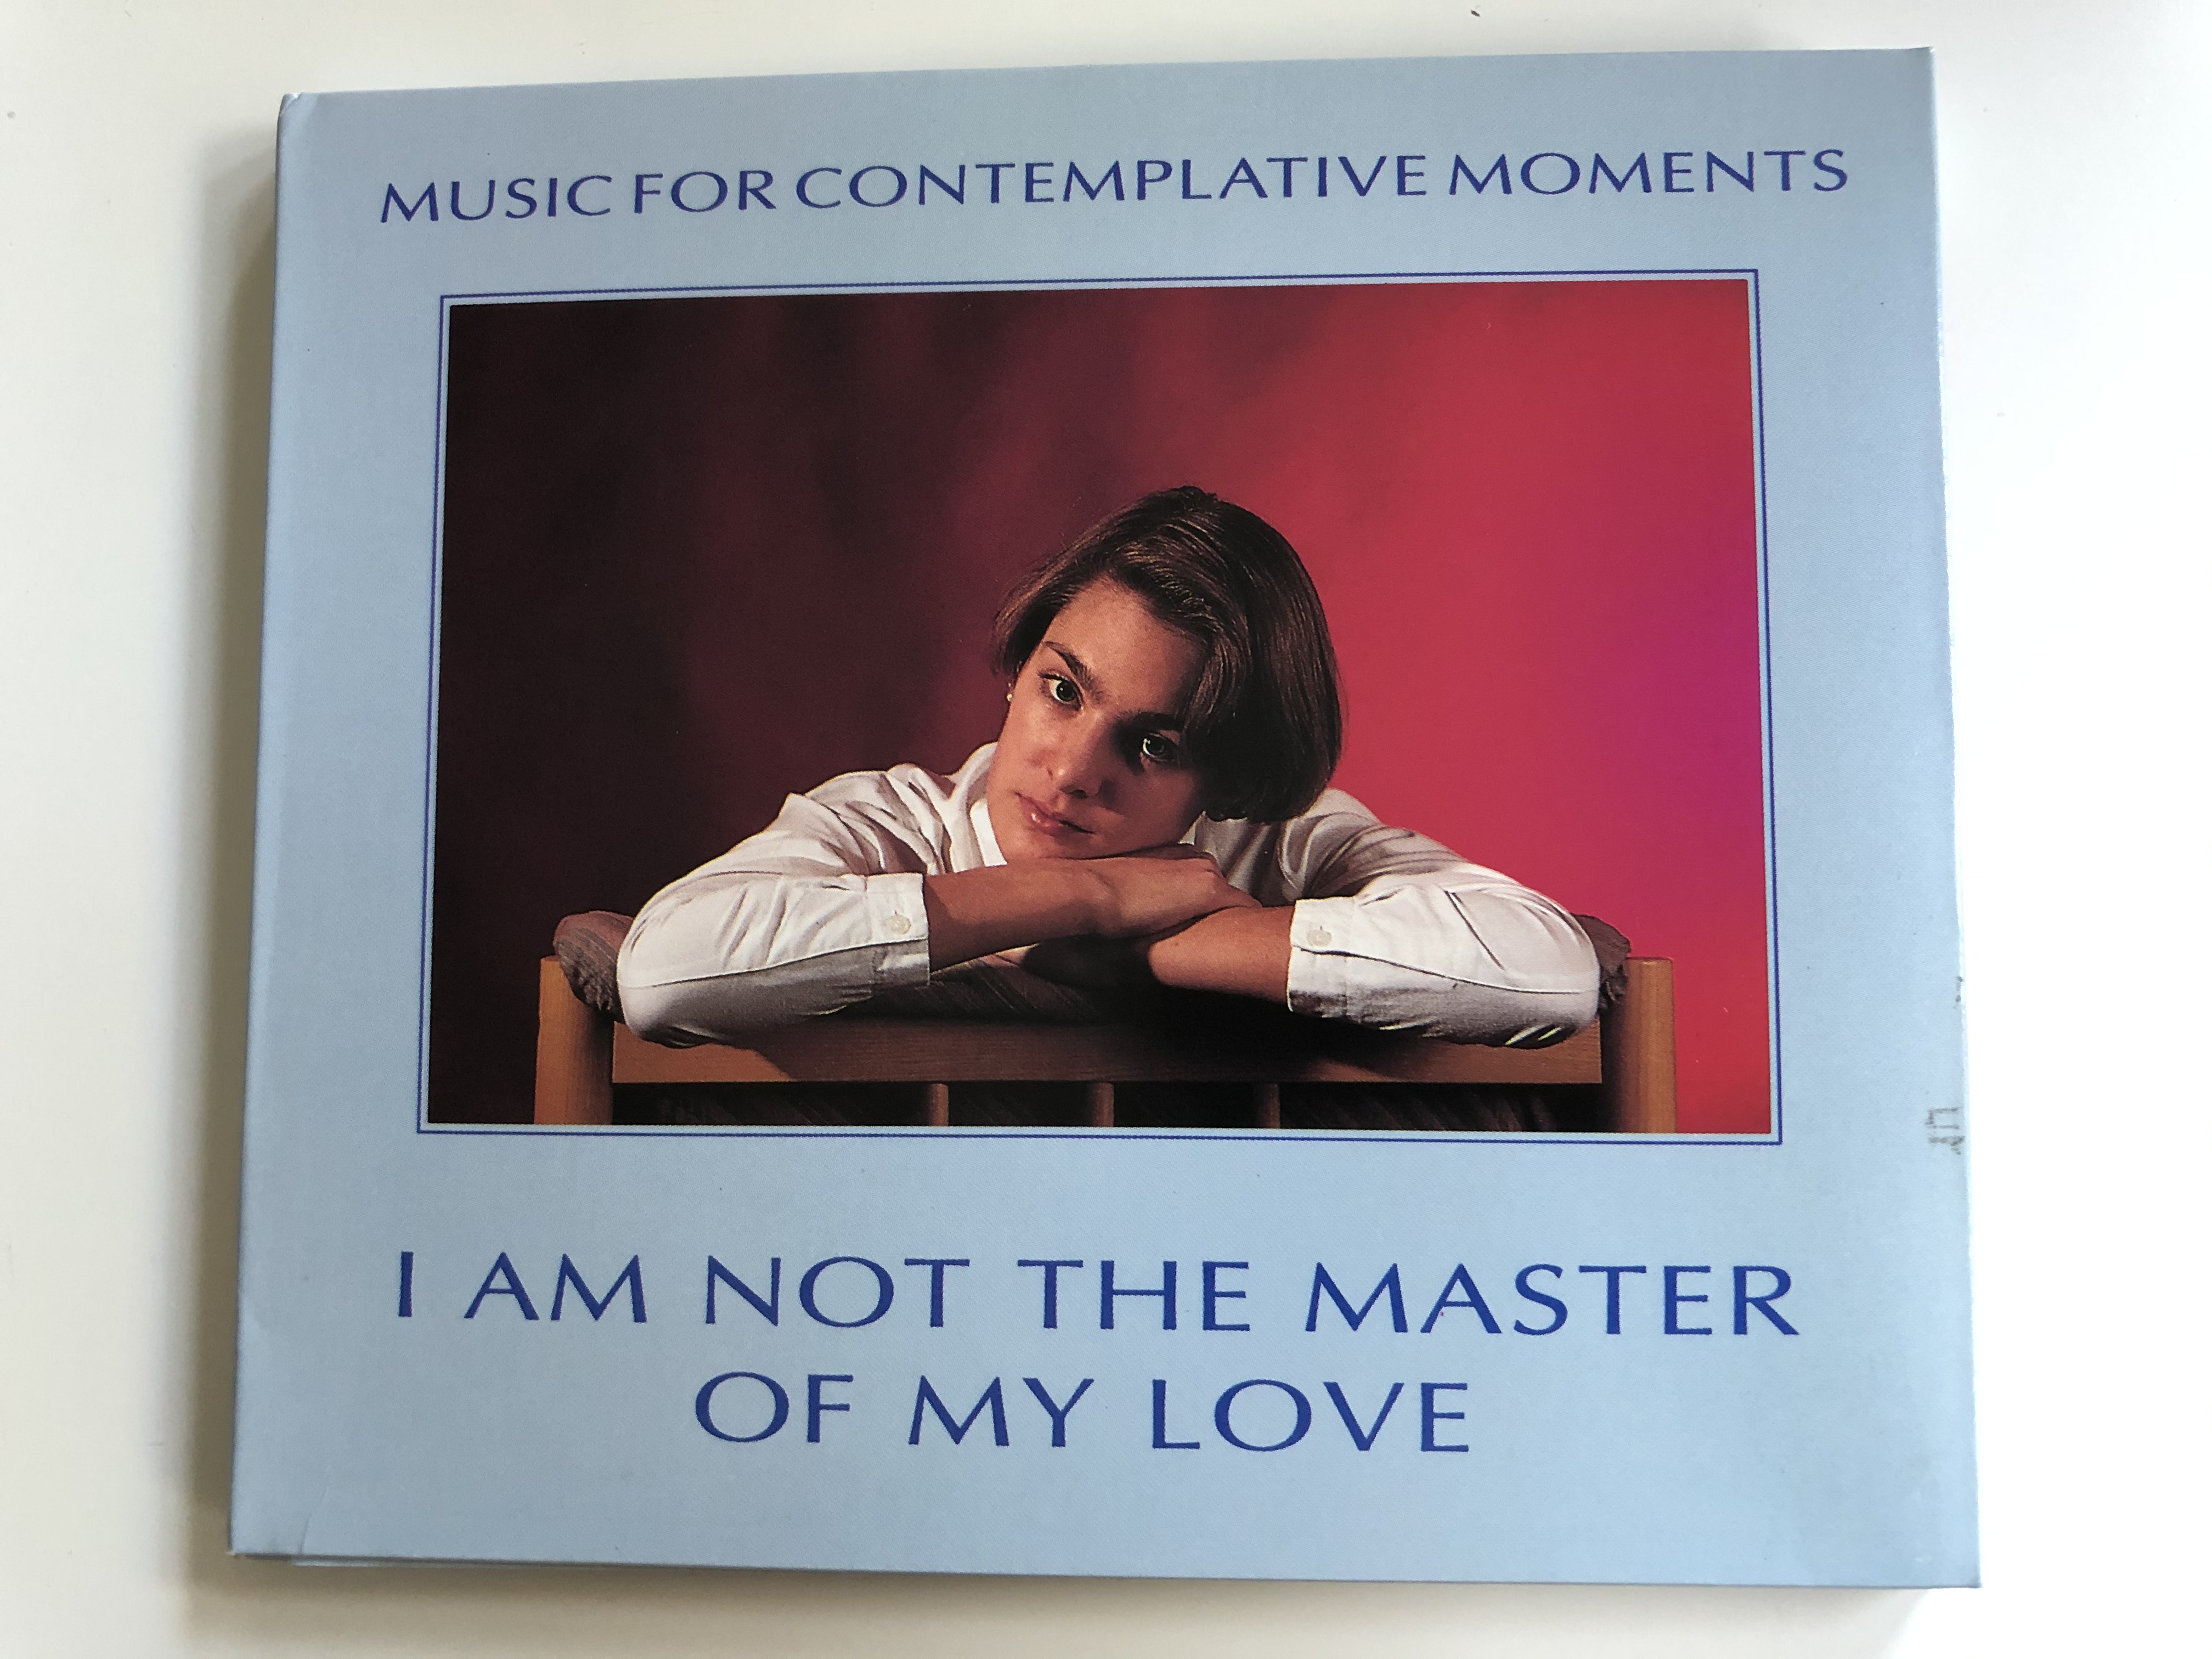 music-for-contemplative-moments-i-am-not-the-master-of-my-love-mona-lisa-edition-meistersinger-musik-audio-cd-stereo-ngh-cd-710-e-1-.jpg